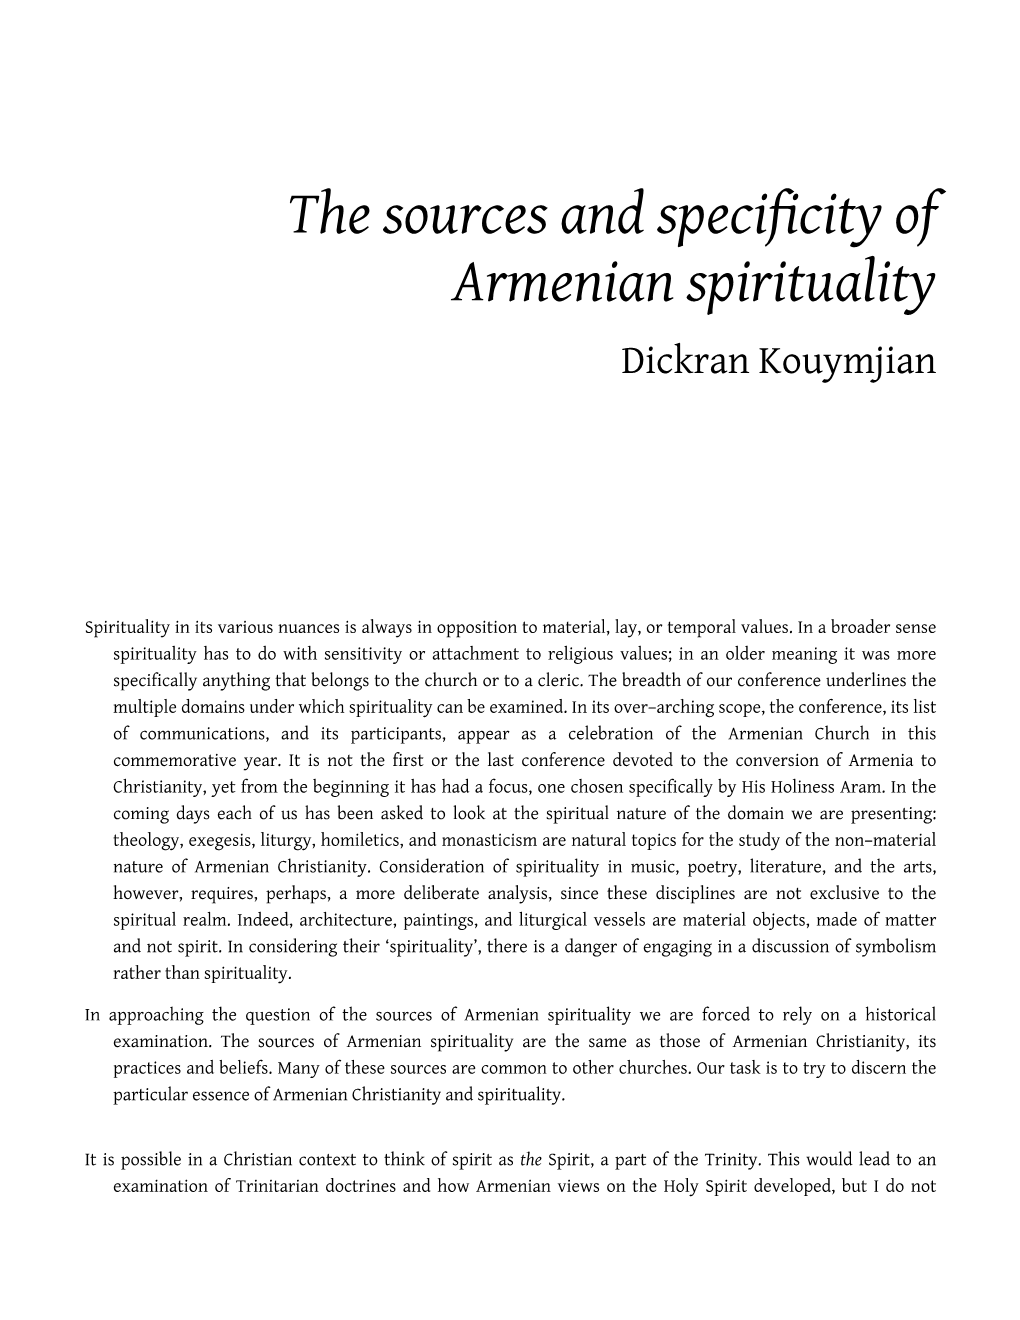 The Sources and Specificity of Armenian Spirituality